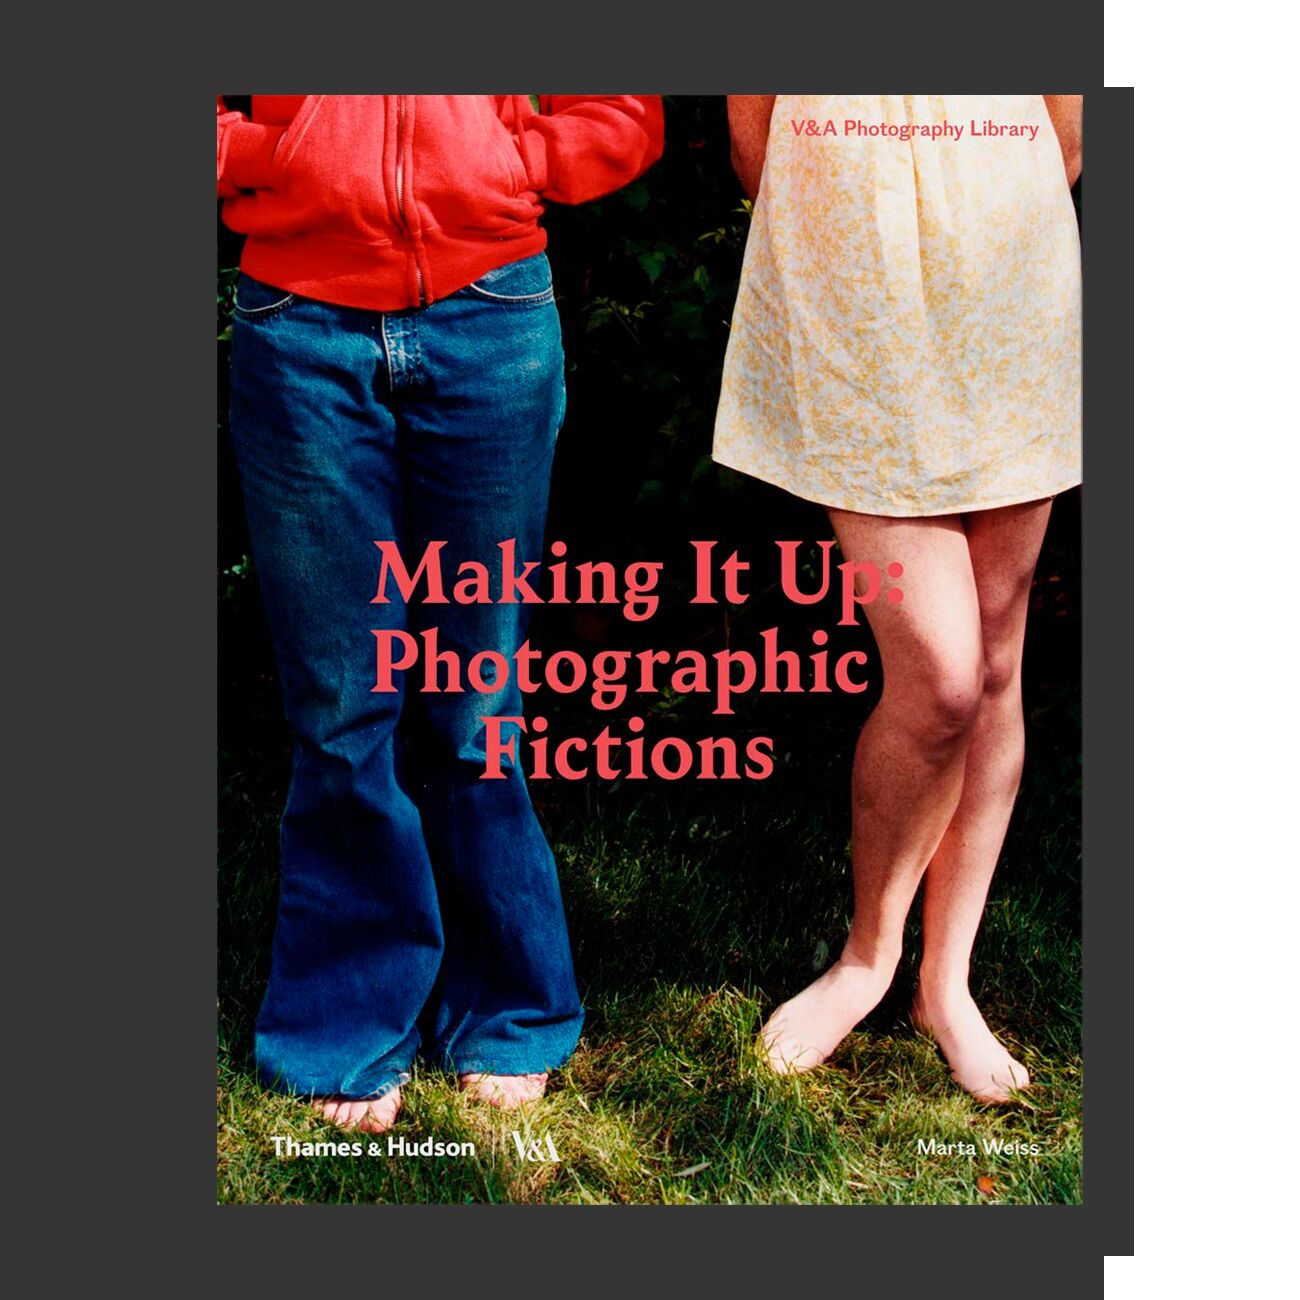 Making It Up: Photographic Fictions